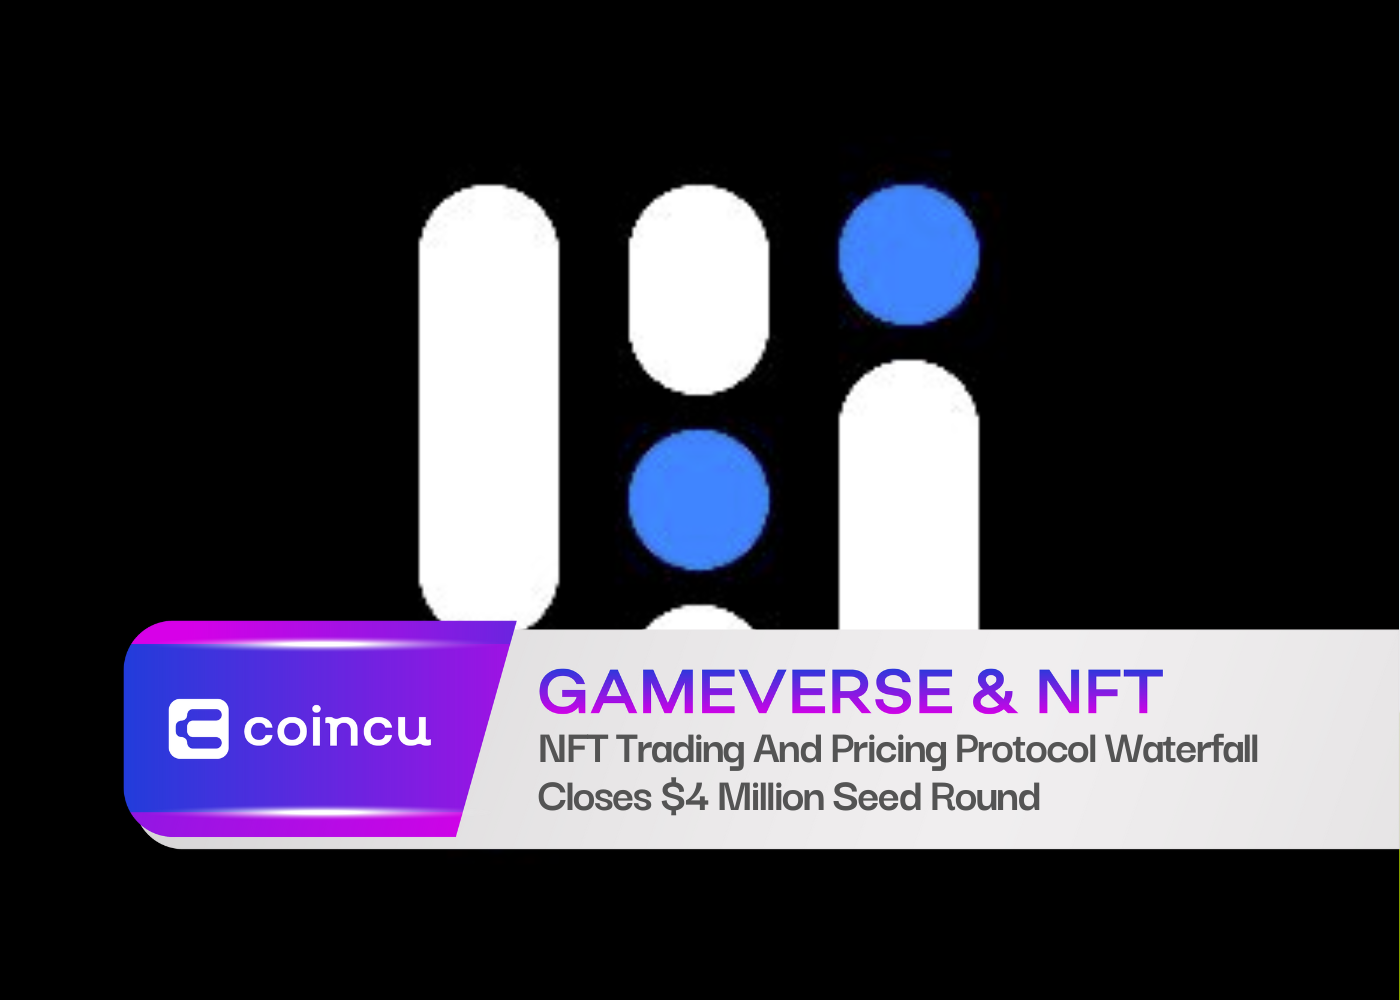 NFT Trading And Pricing Protocol Waterfall Closes $4 Million Seed Round